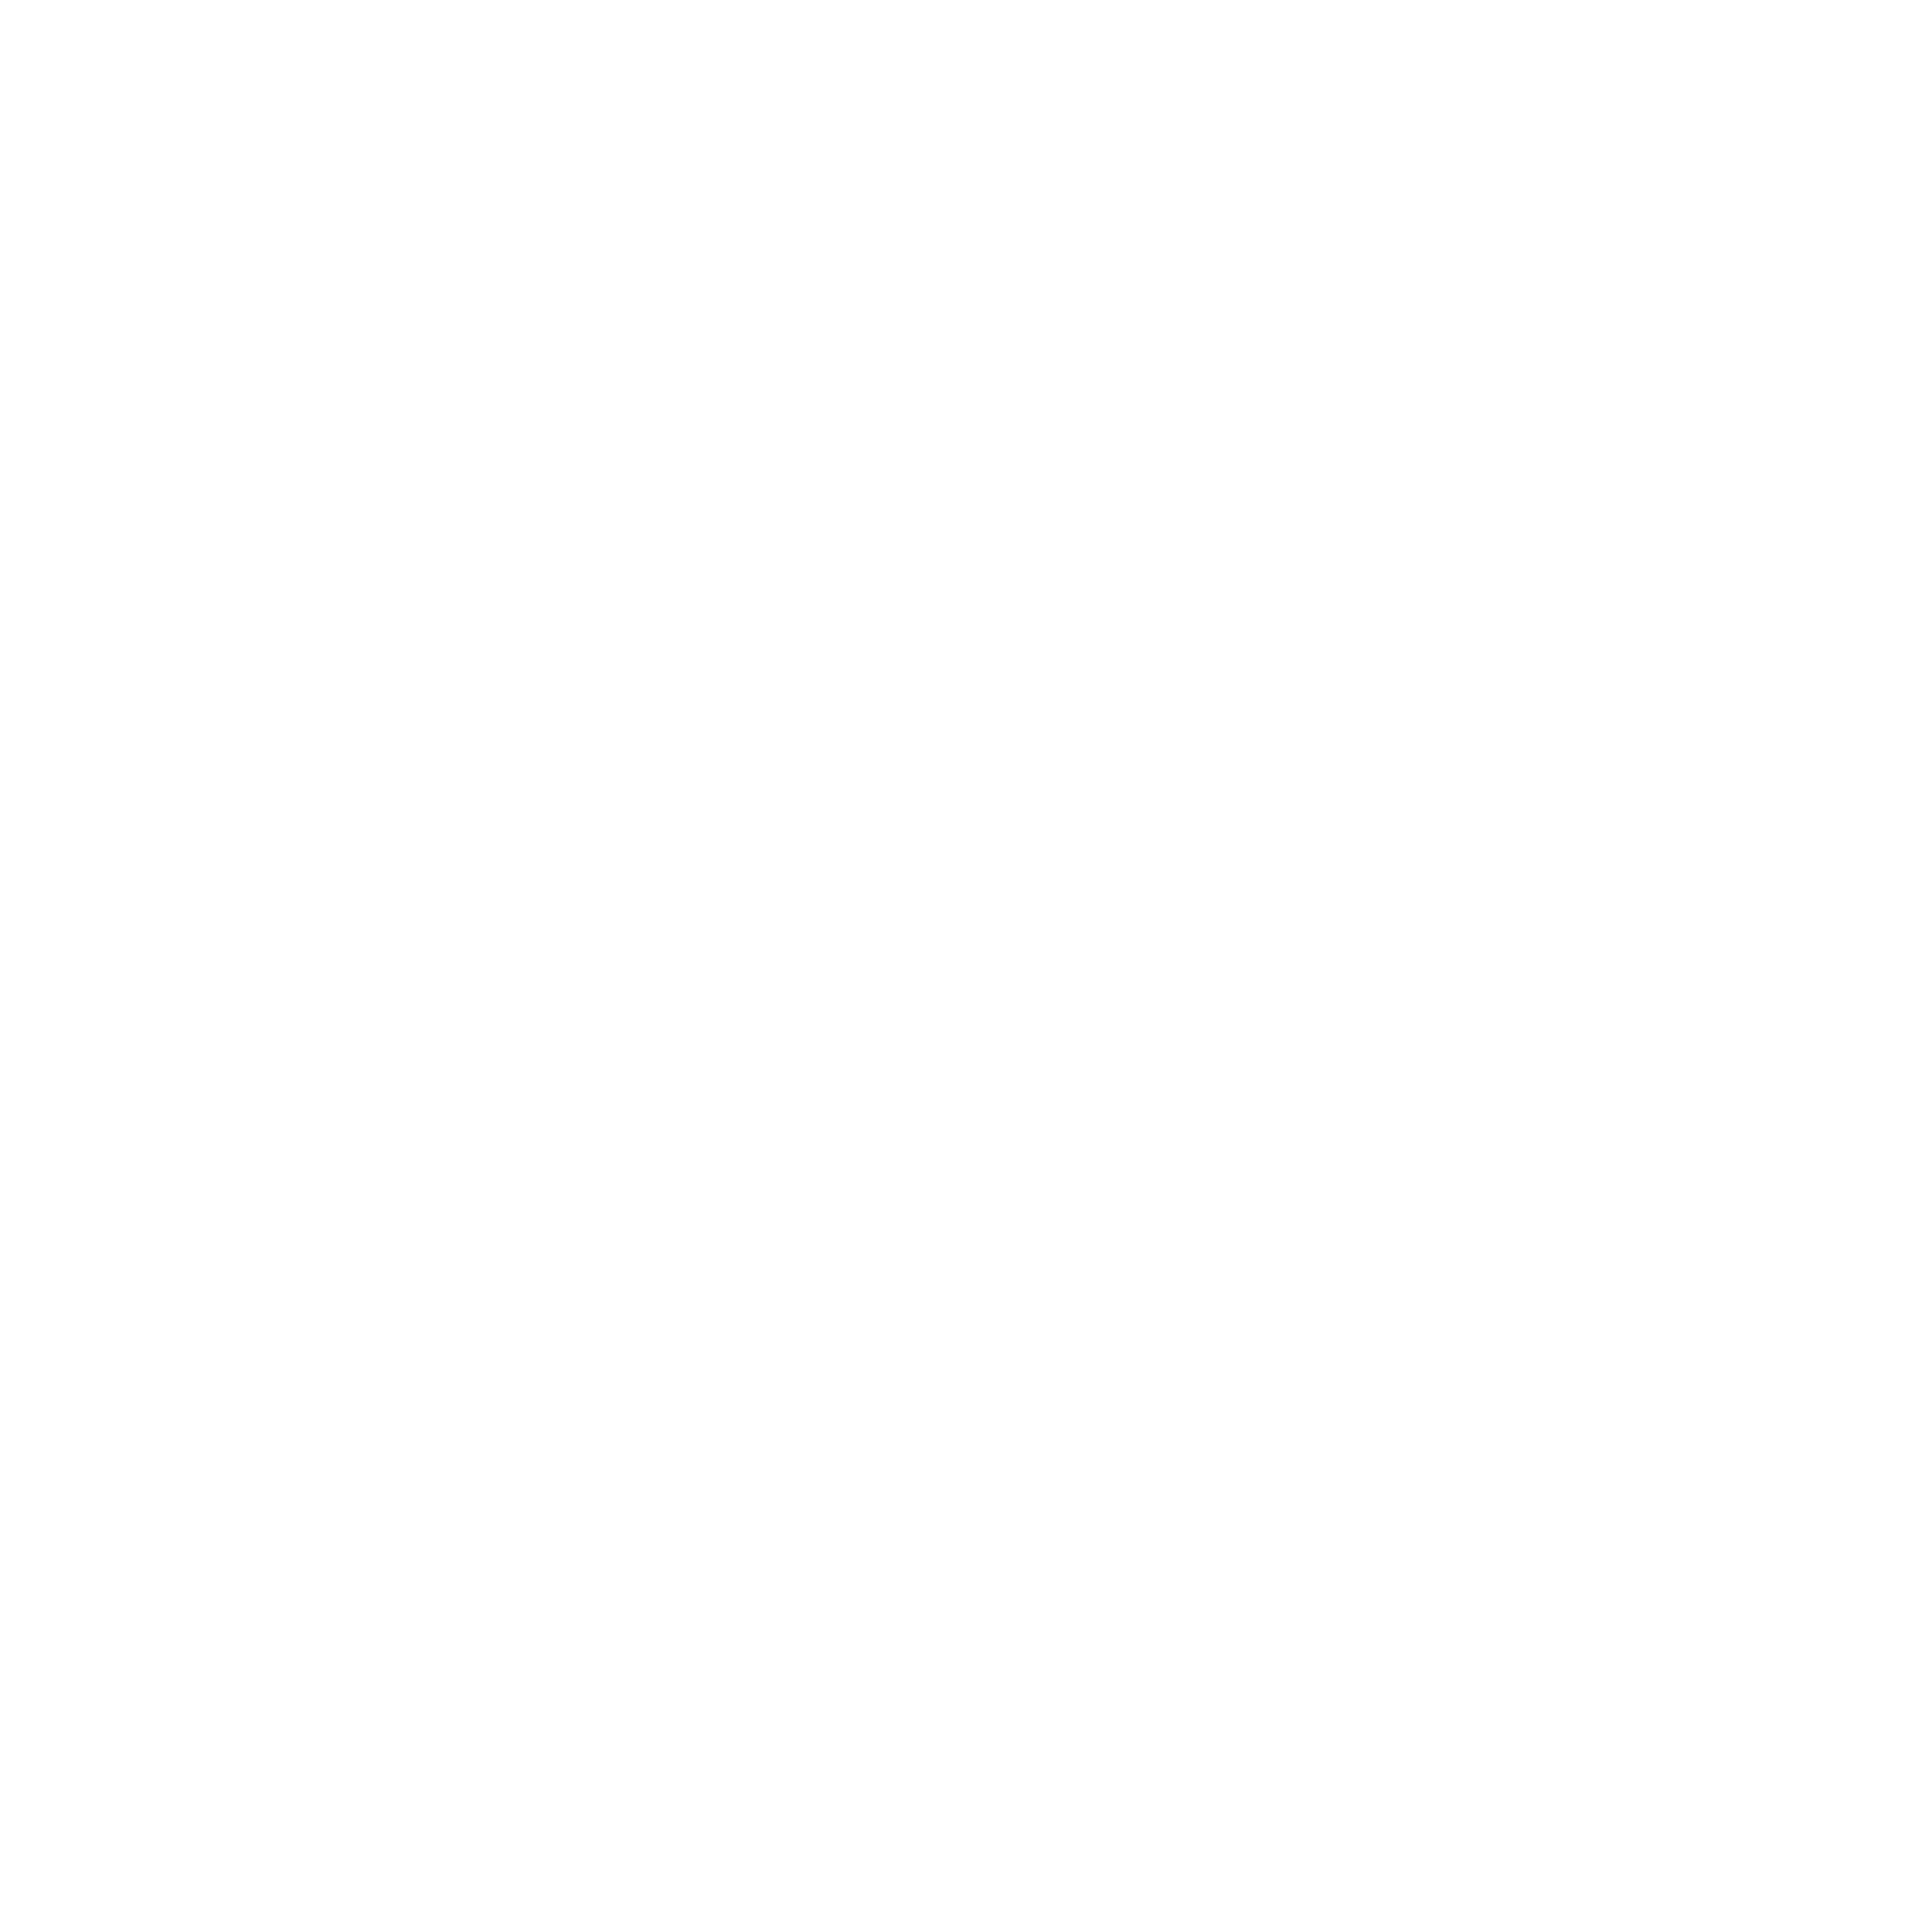 Central Lakes of Uptown_white.png